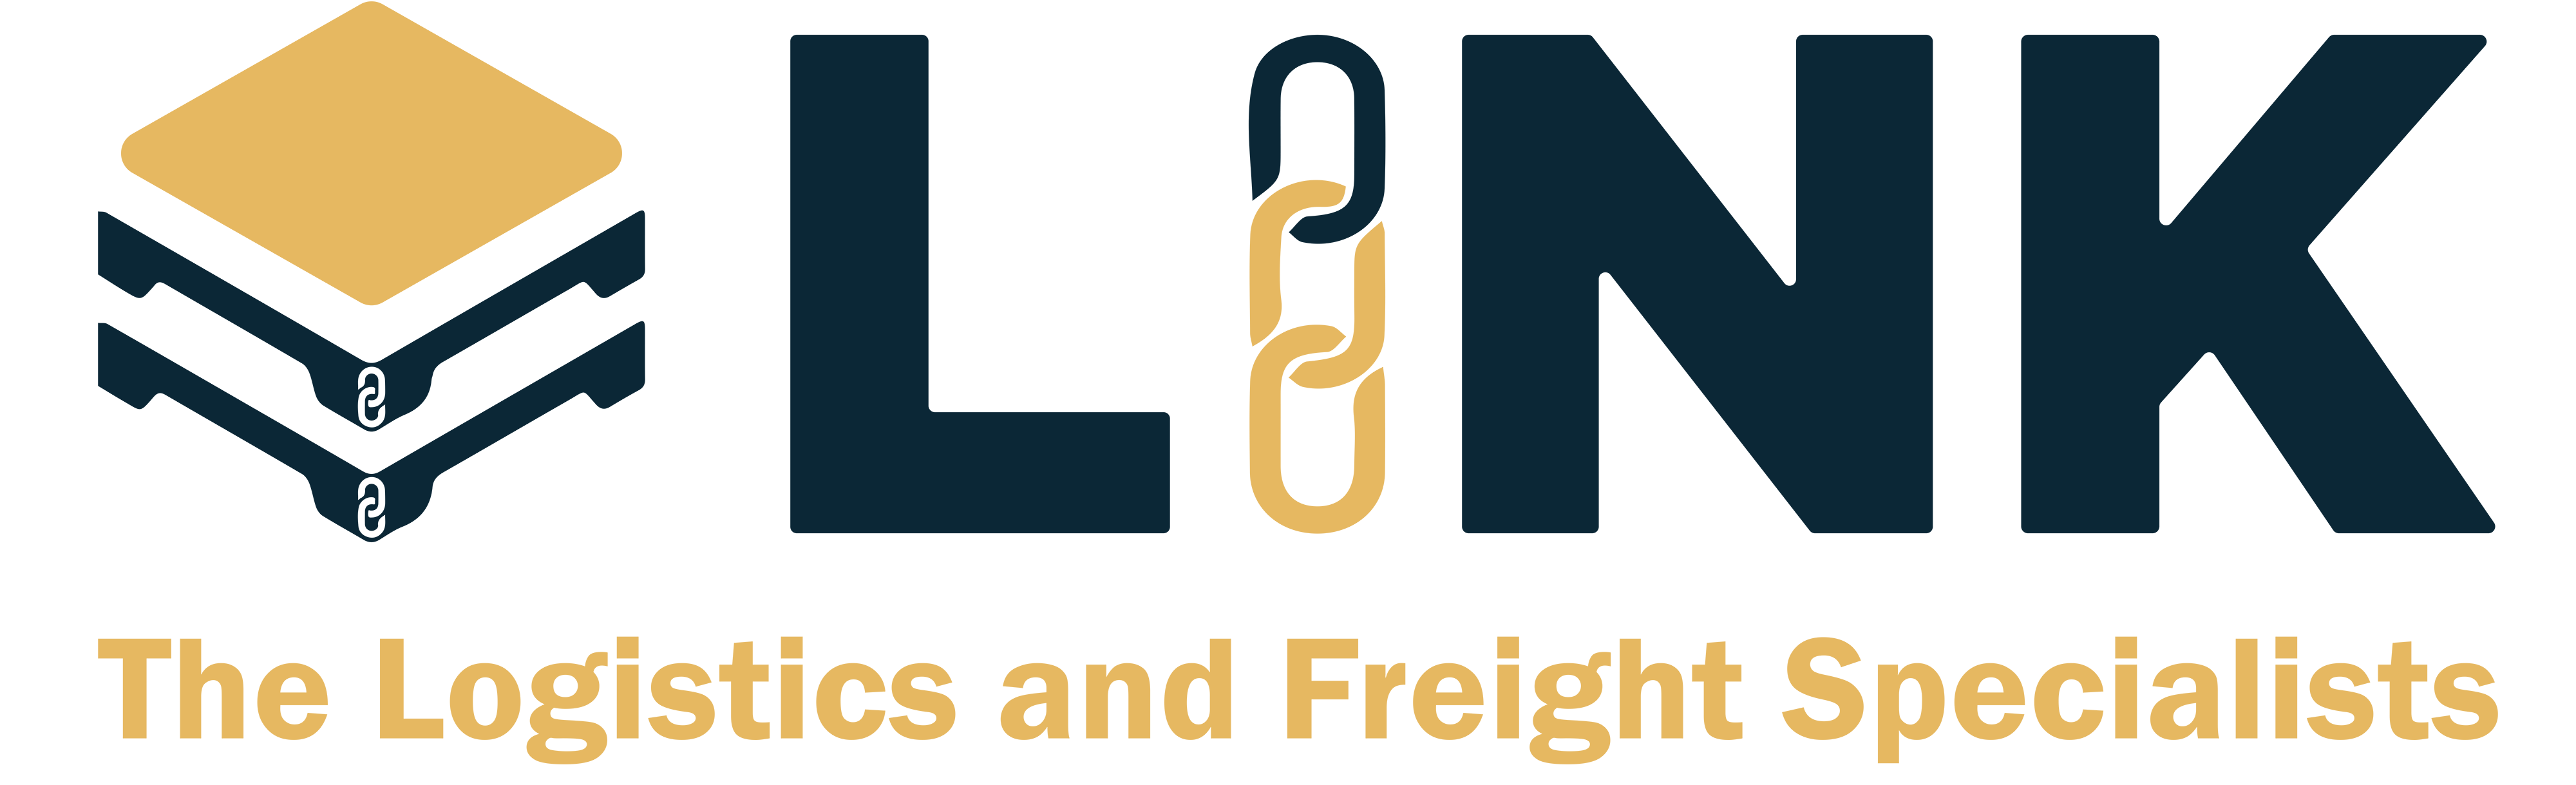 Link Supply Chain Logistics And Freight Consultancy